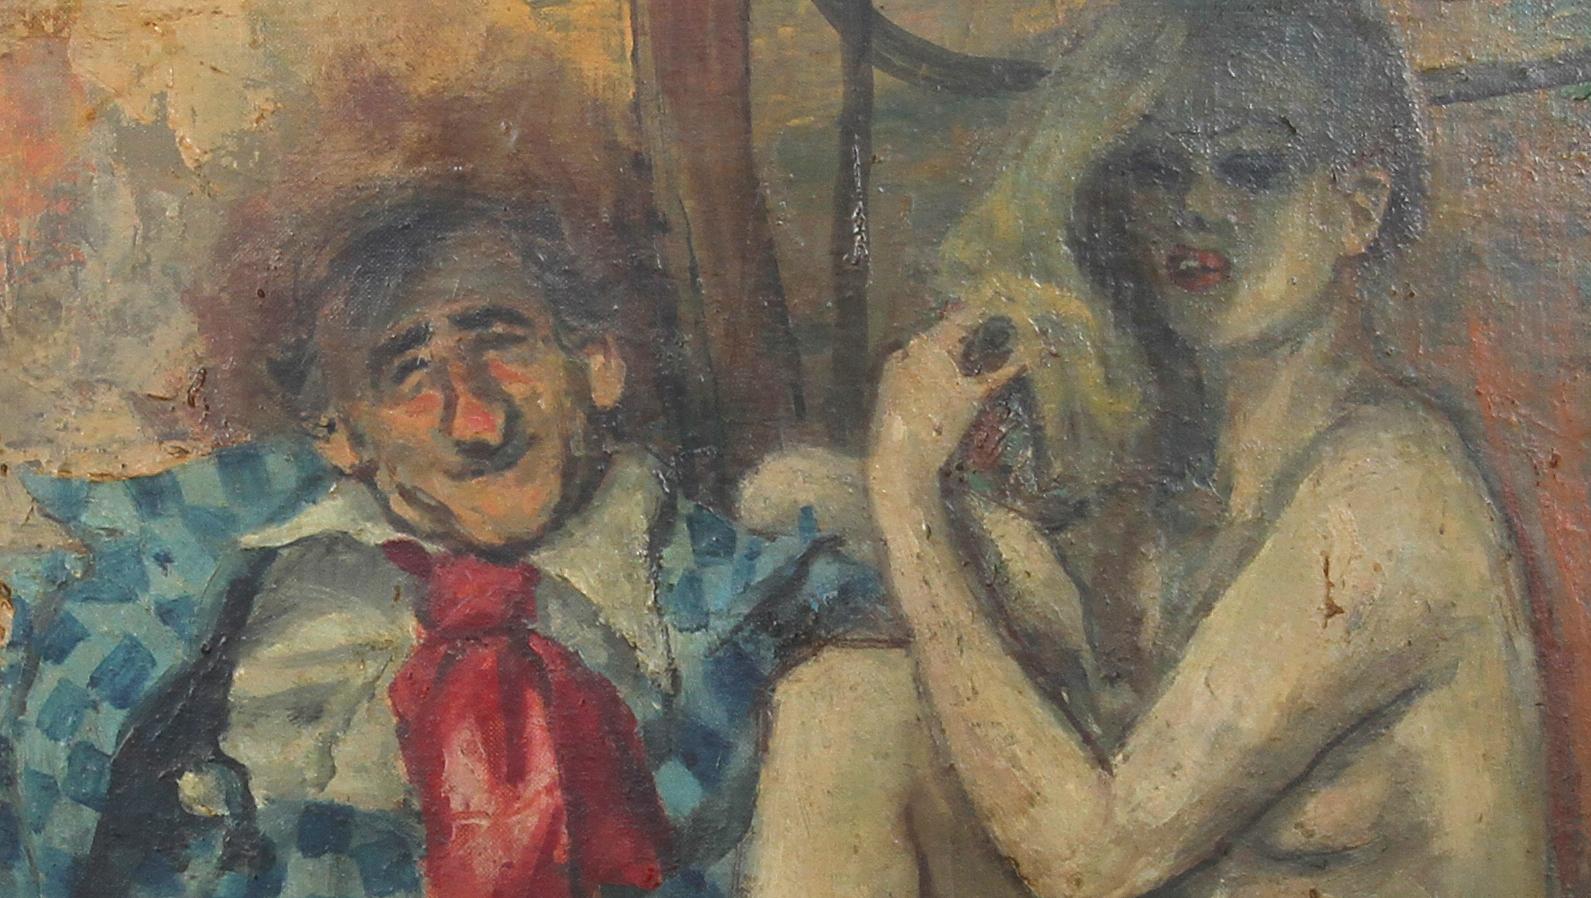 Clown and Nude - Painting by Marshall Goodman